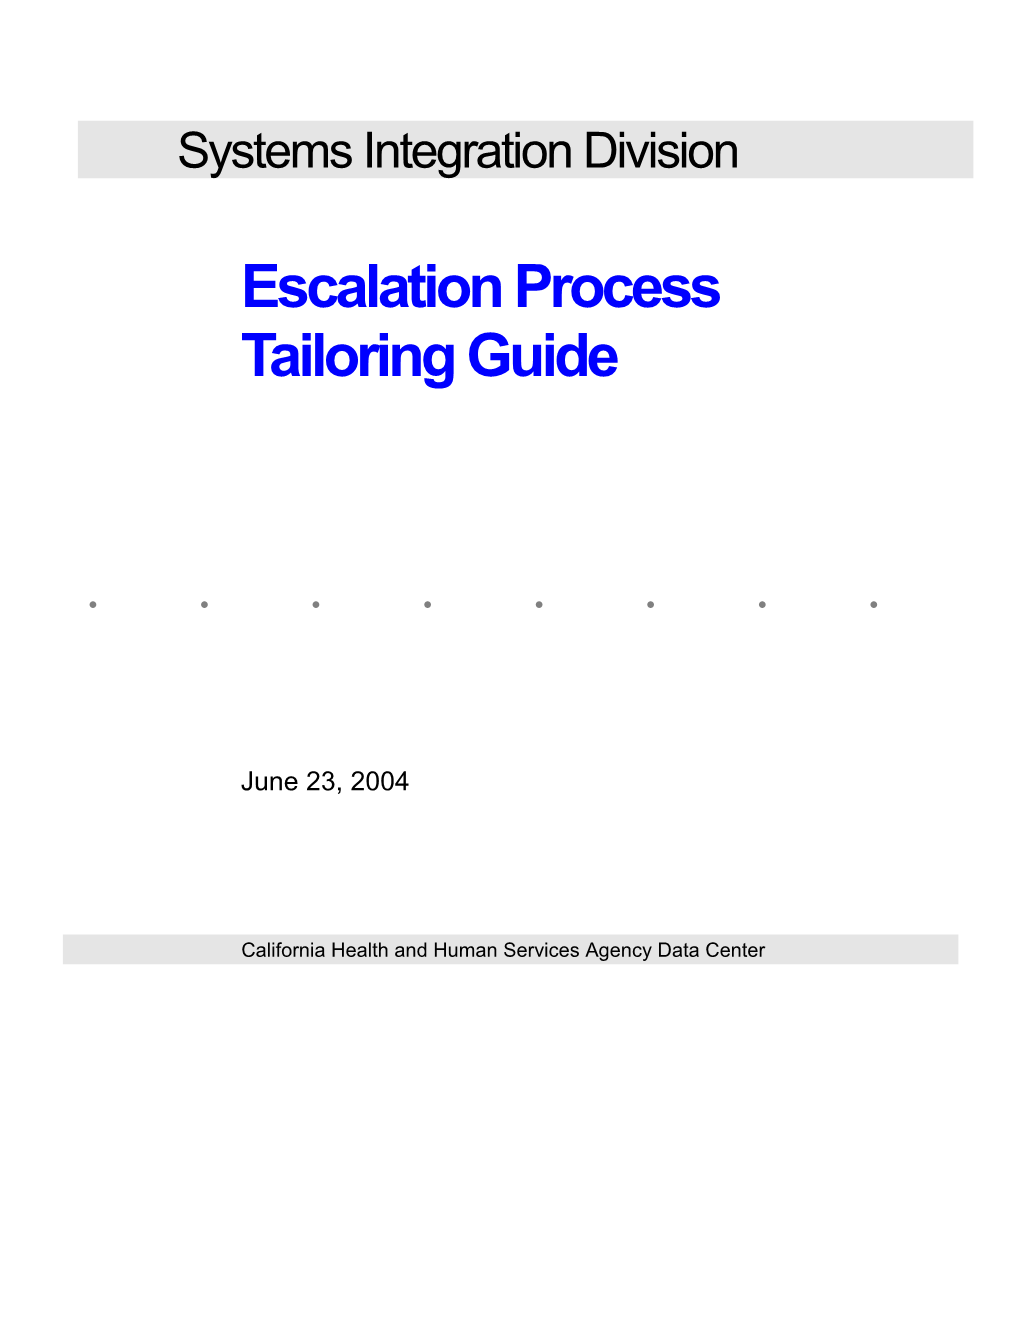 SID Escalation Process Tailoring Guide